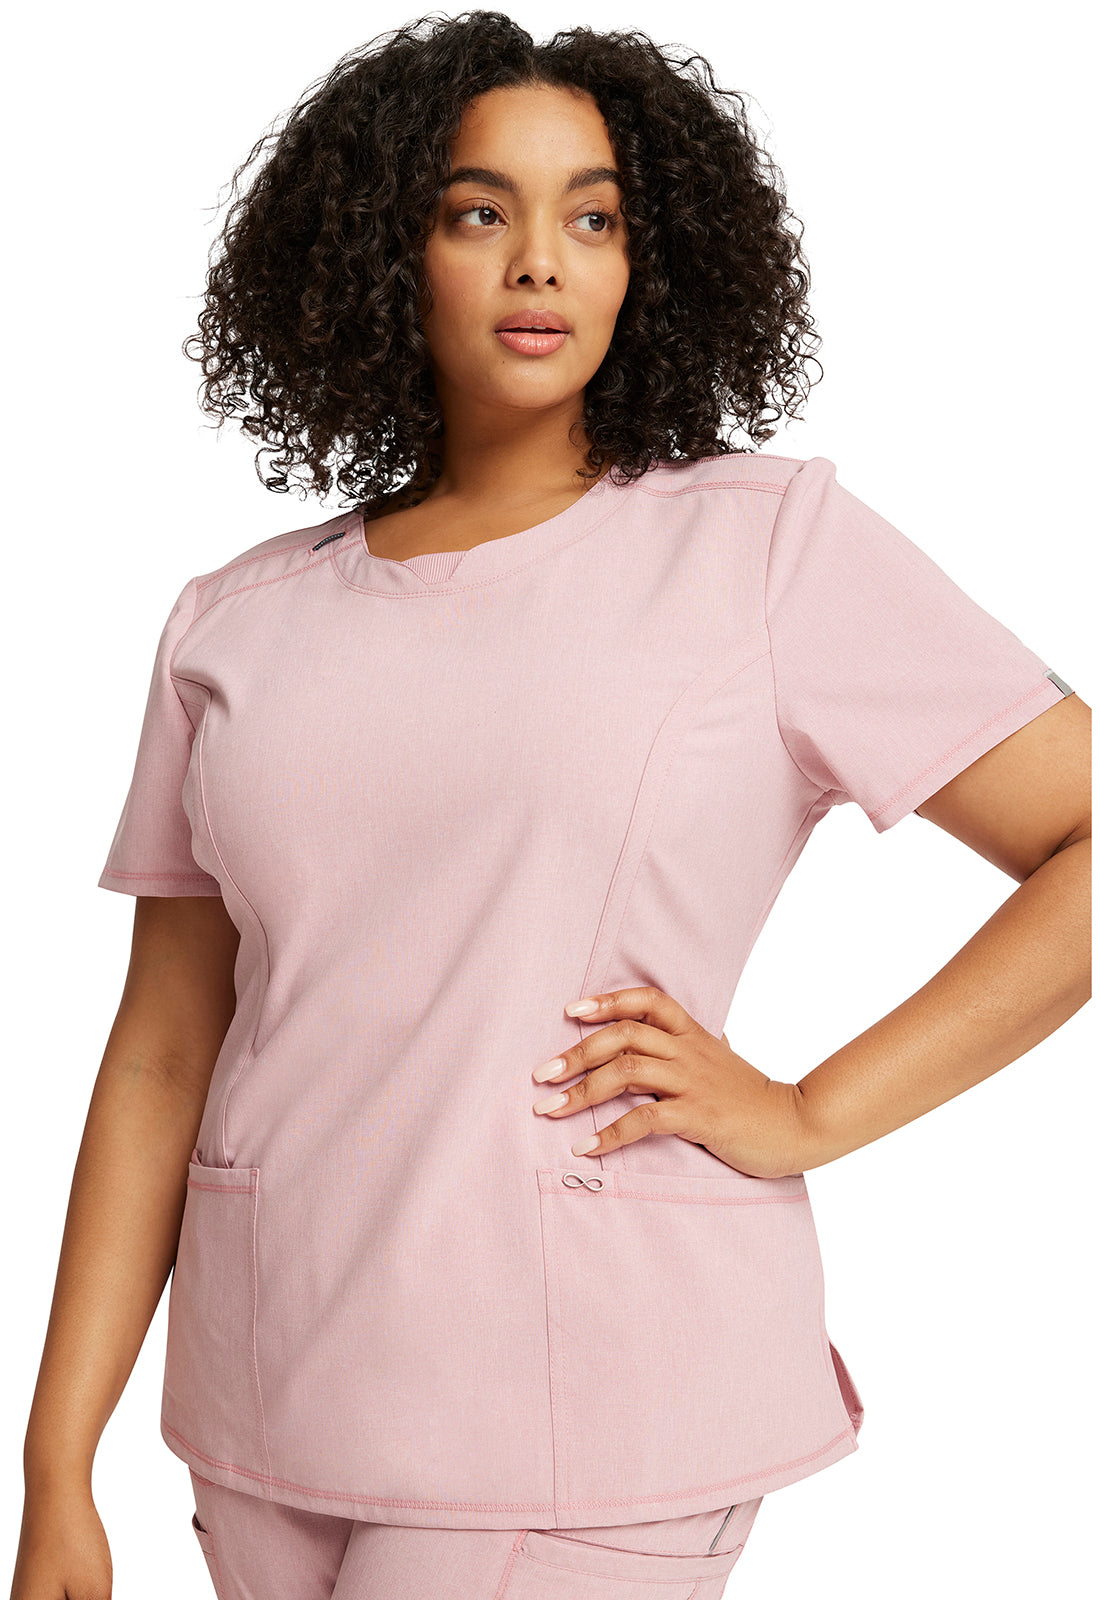 V-Neck Top in Frosted Rose Heather 2624A